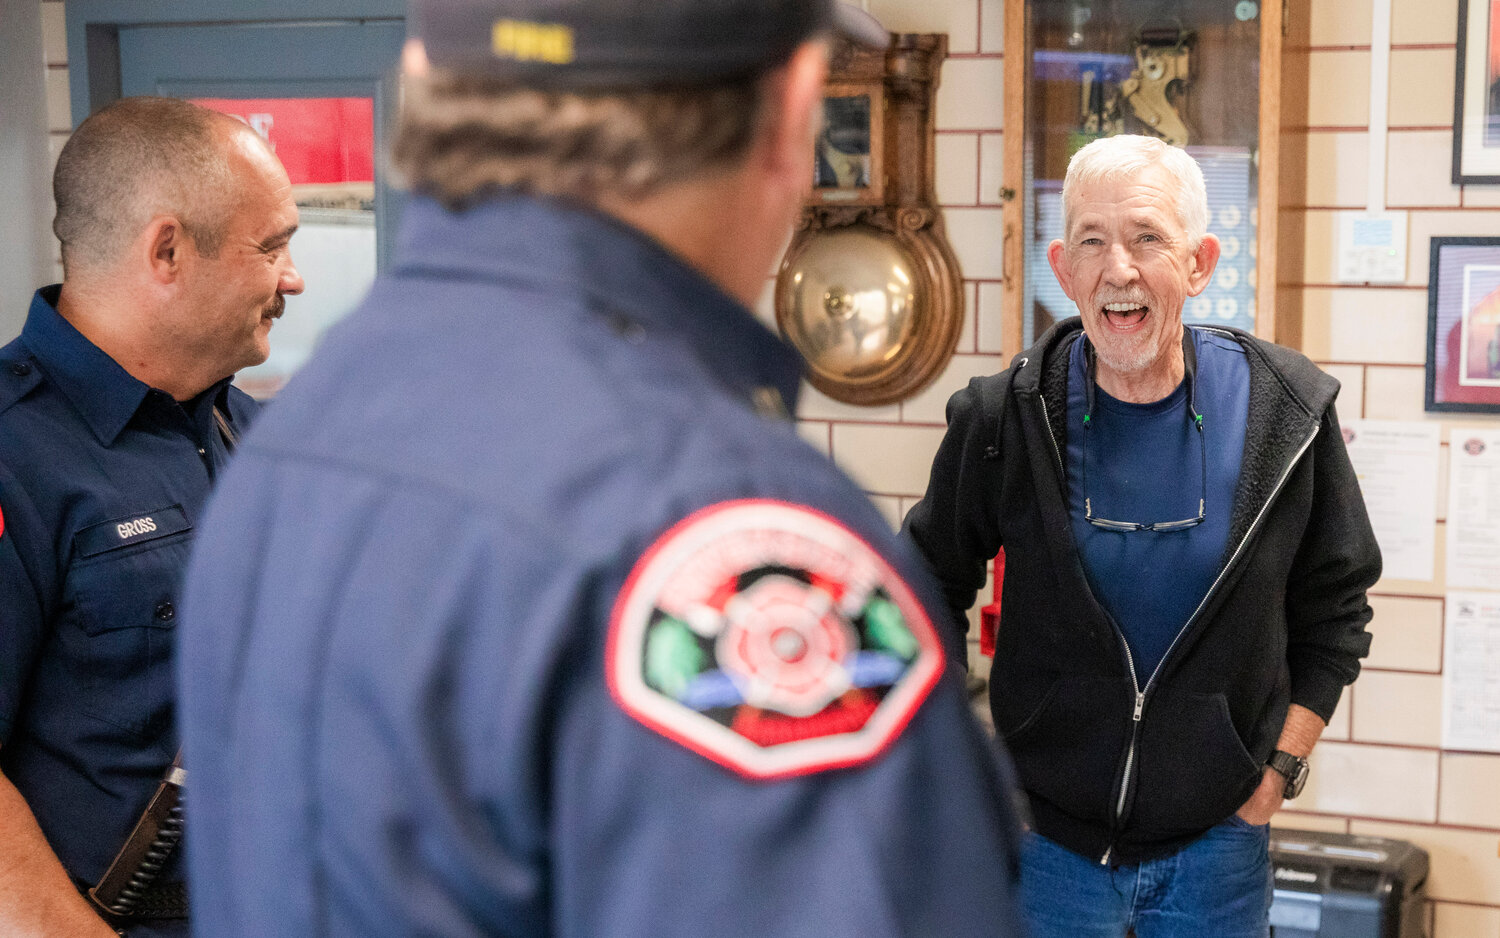 Scott Olson, 67, of Centralia, smiles while thanking Riverside firefighters for the work they do Wednesday morning. Crews from Riverside Fire Authority assisted an American Medical Response unit responding to the scene with firefighters using a defibrillator and CPR machine to stabilize Olson’s heart April 7, 2023.